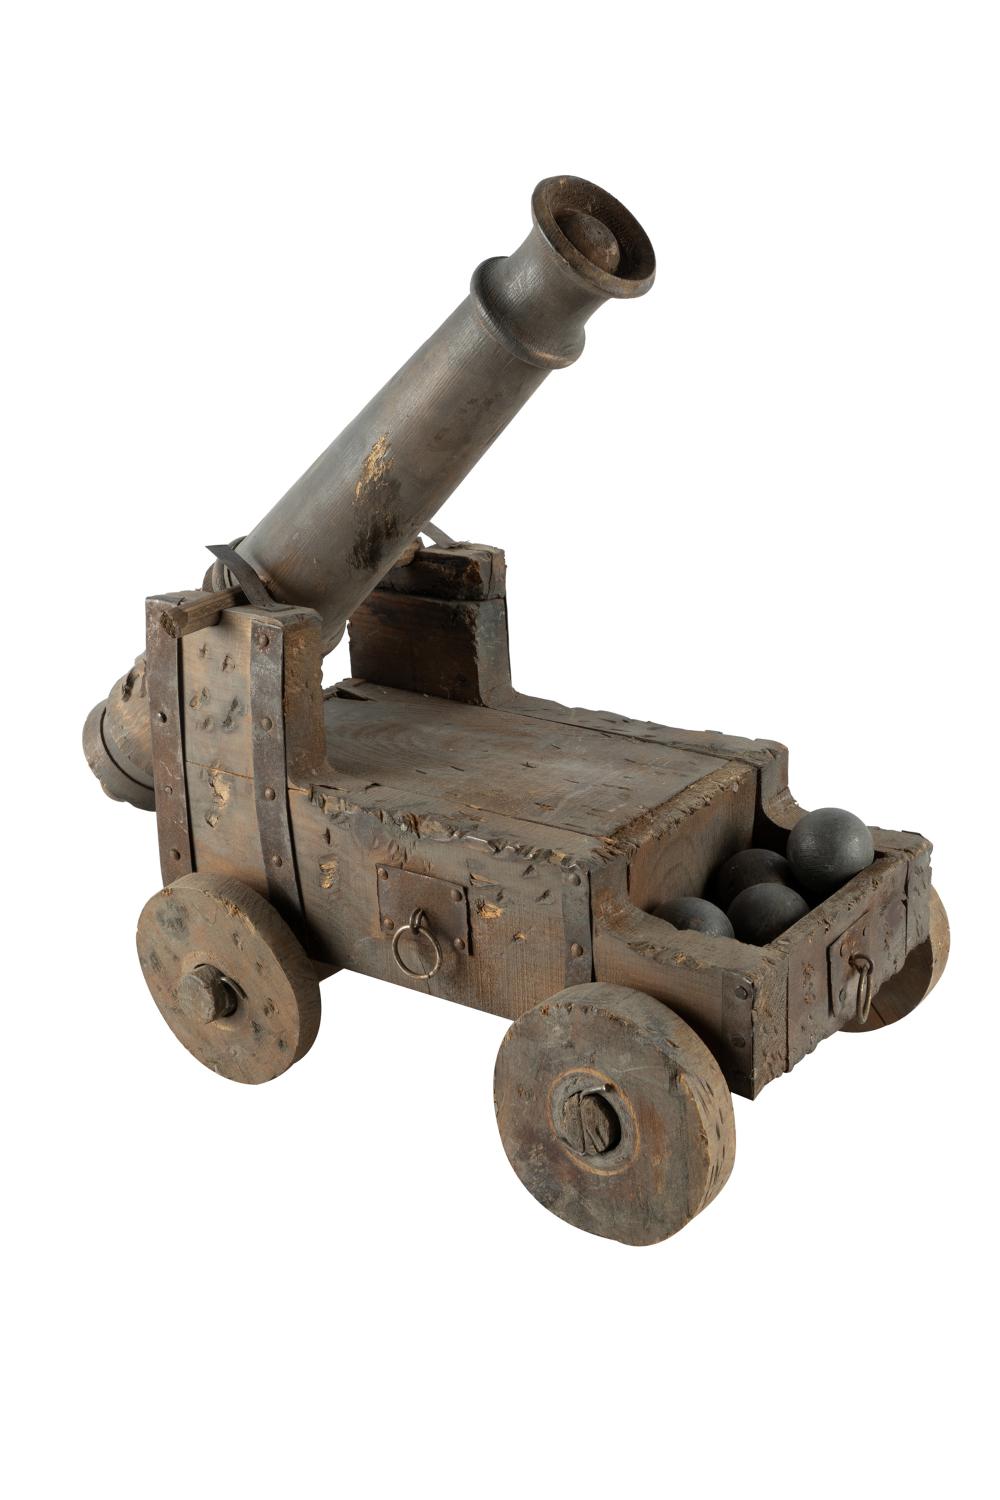 CARVED WOOD CANNON MODELaccompanied 333298